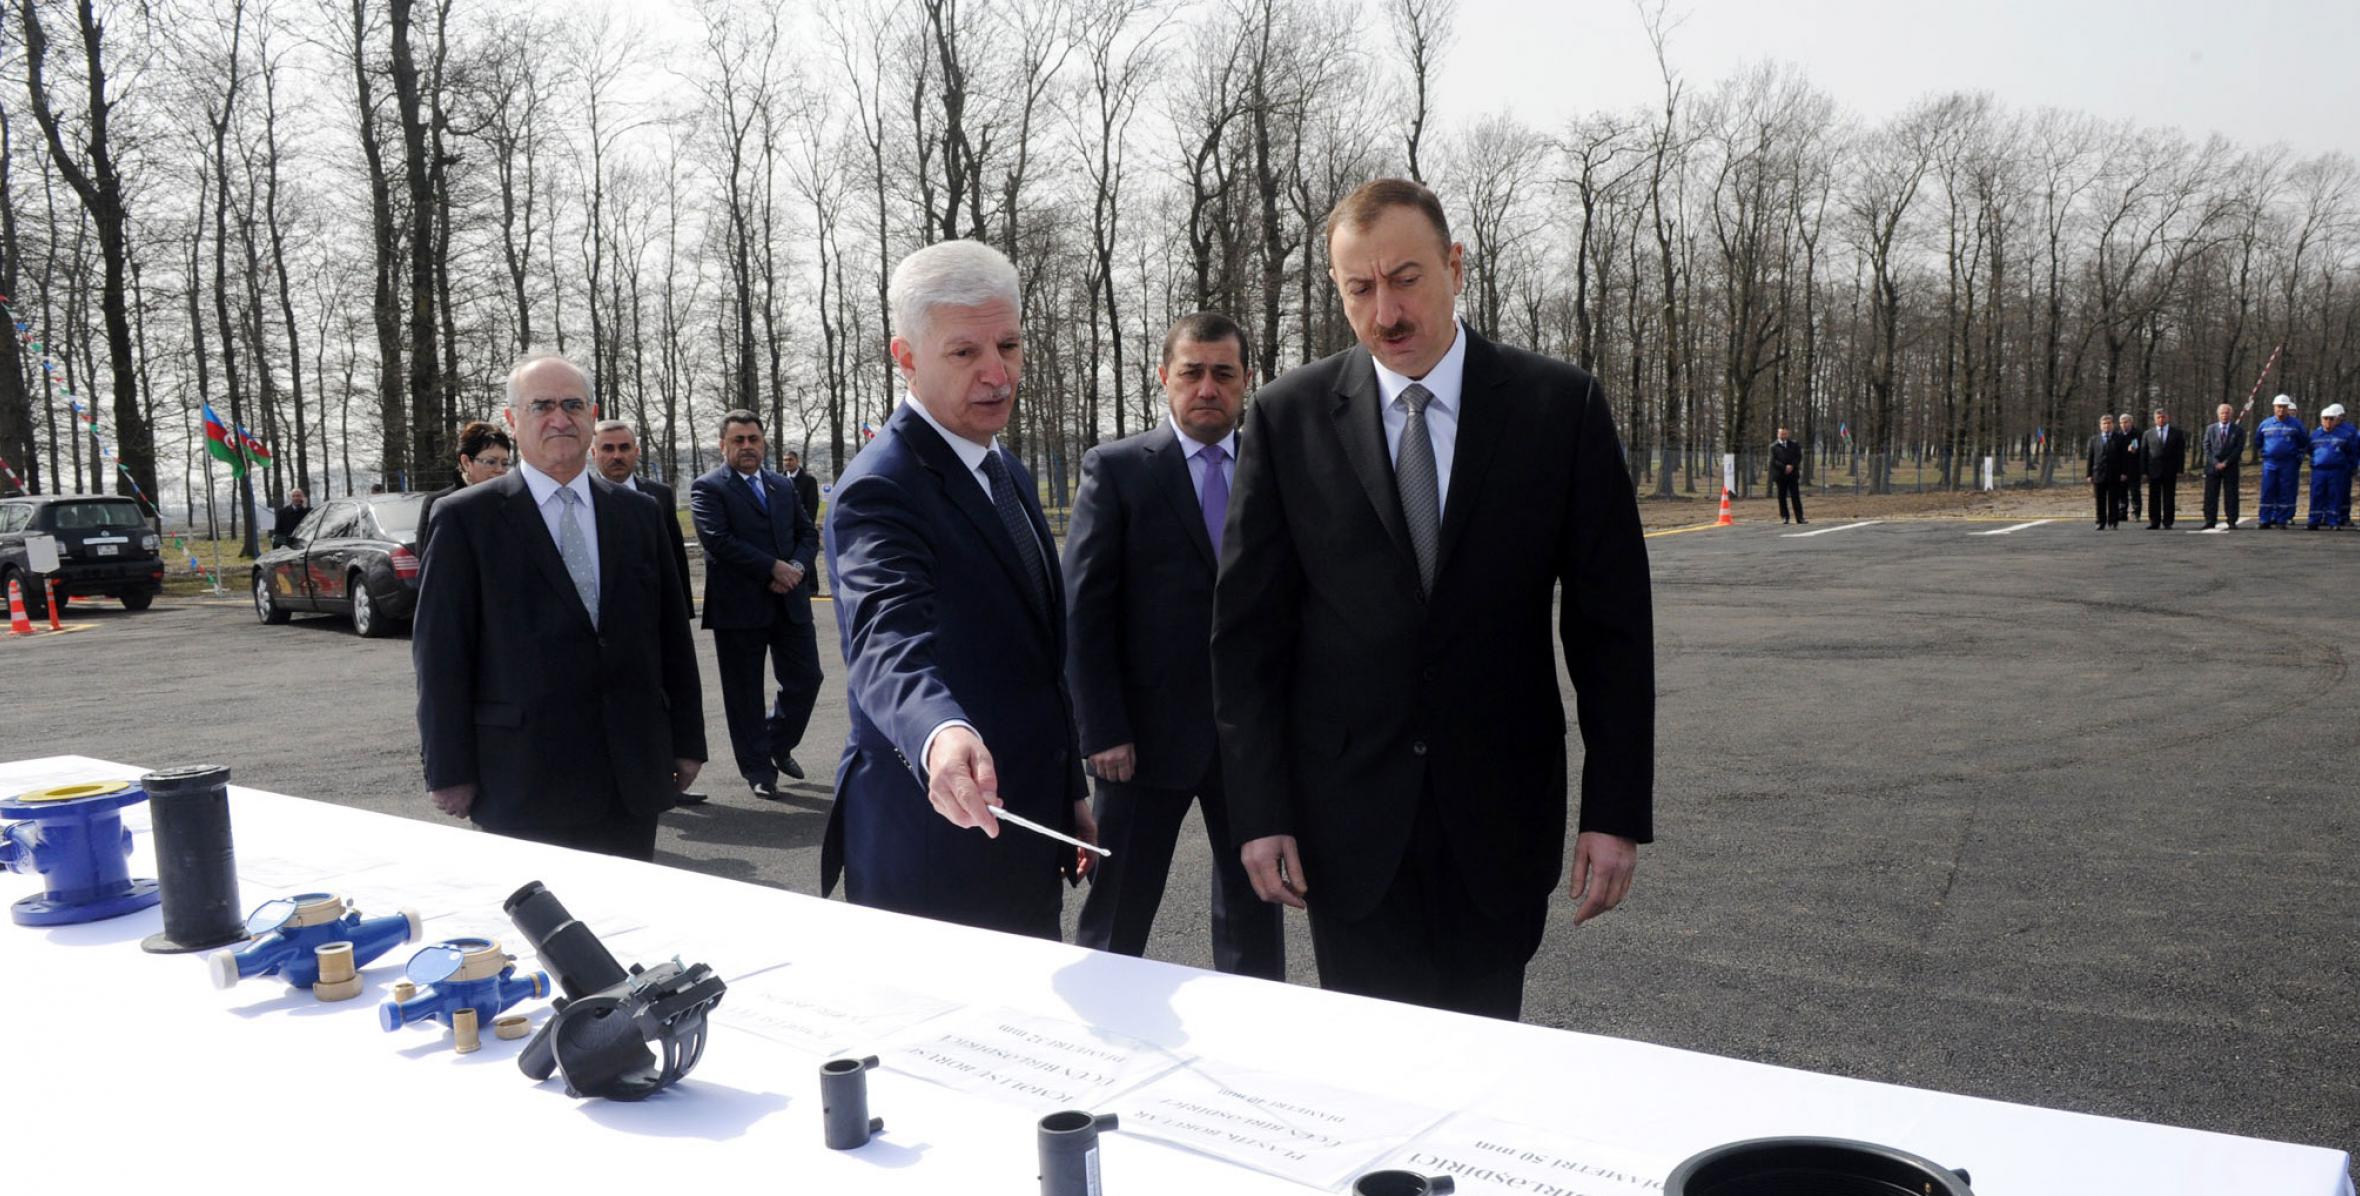 Ilham Aliyev attended a groundbreaking ceremony for the water and sewage system of Masalli